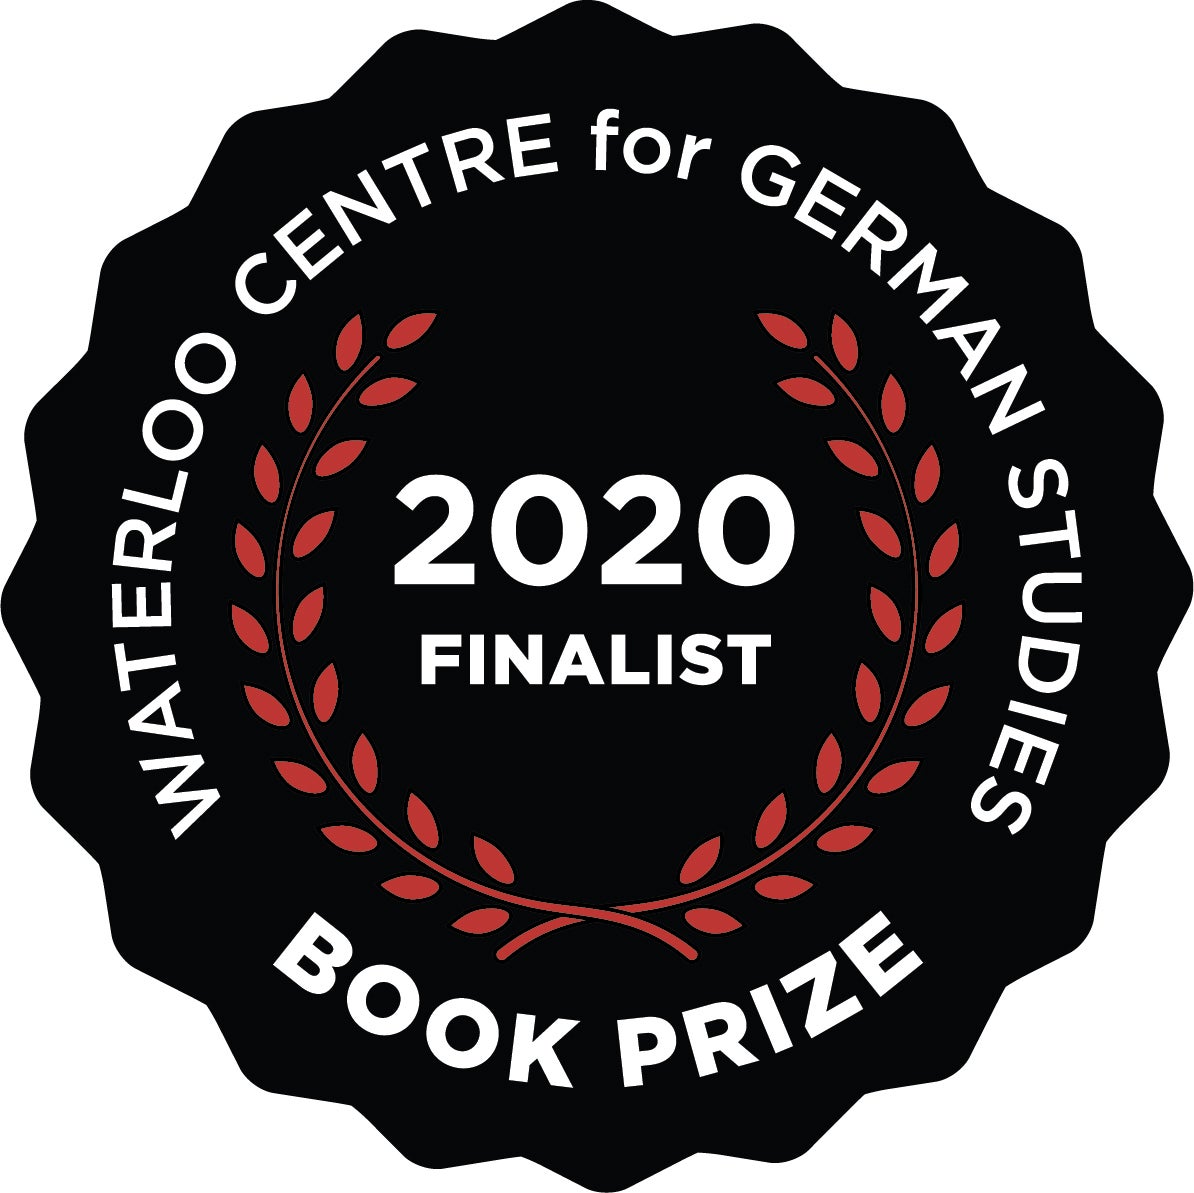 WCGS Book Prize 2020 seal